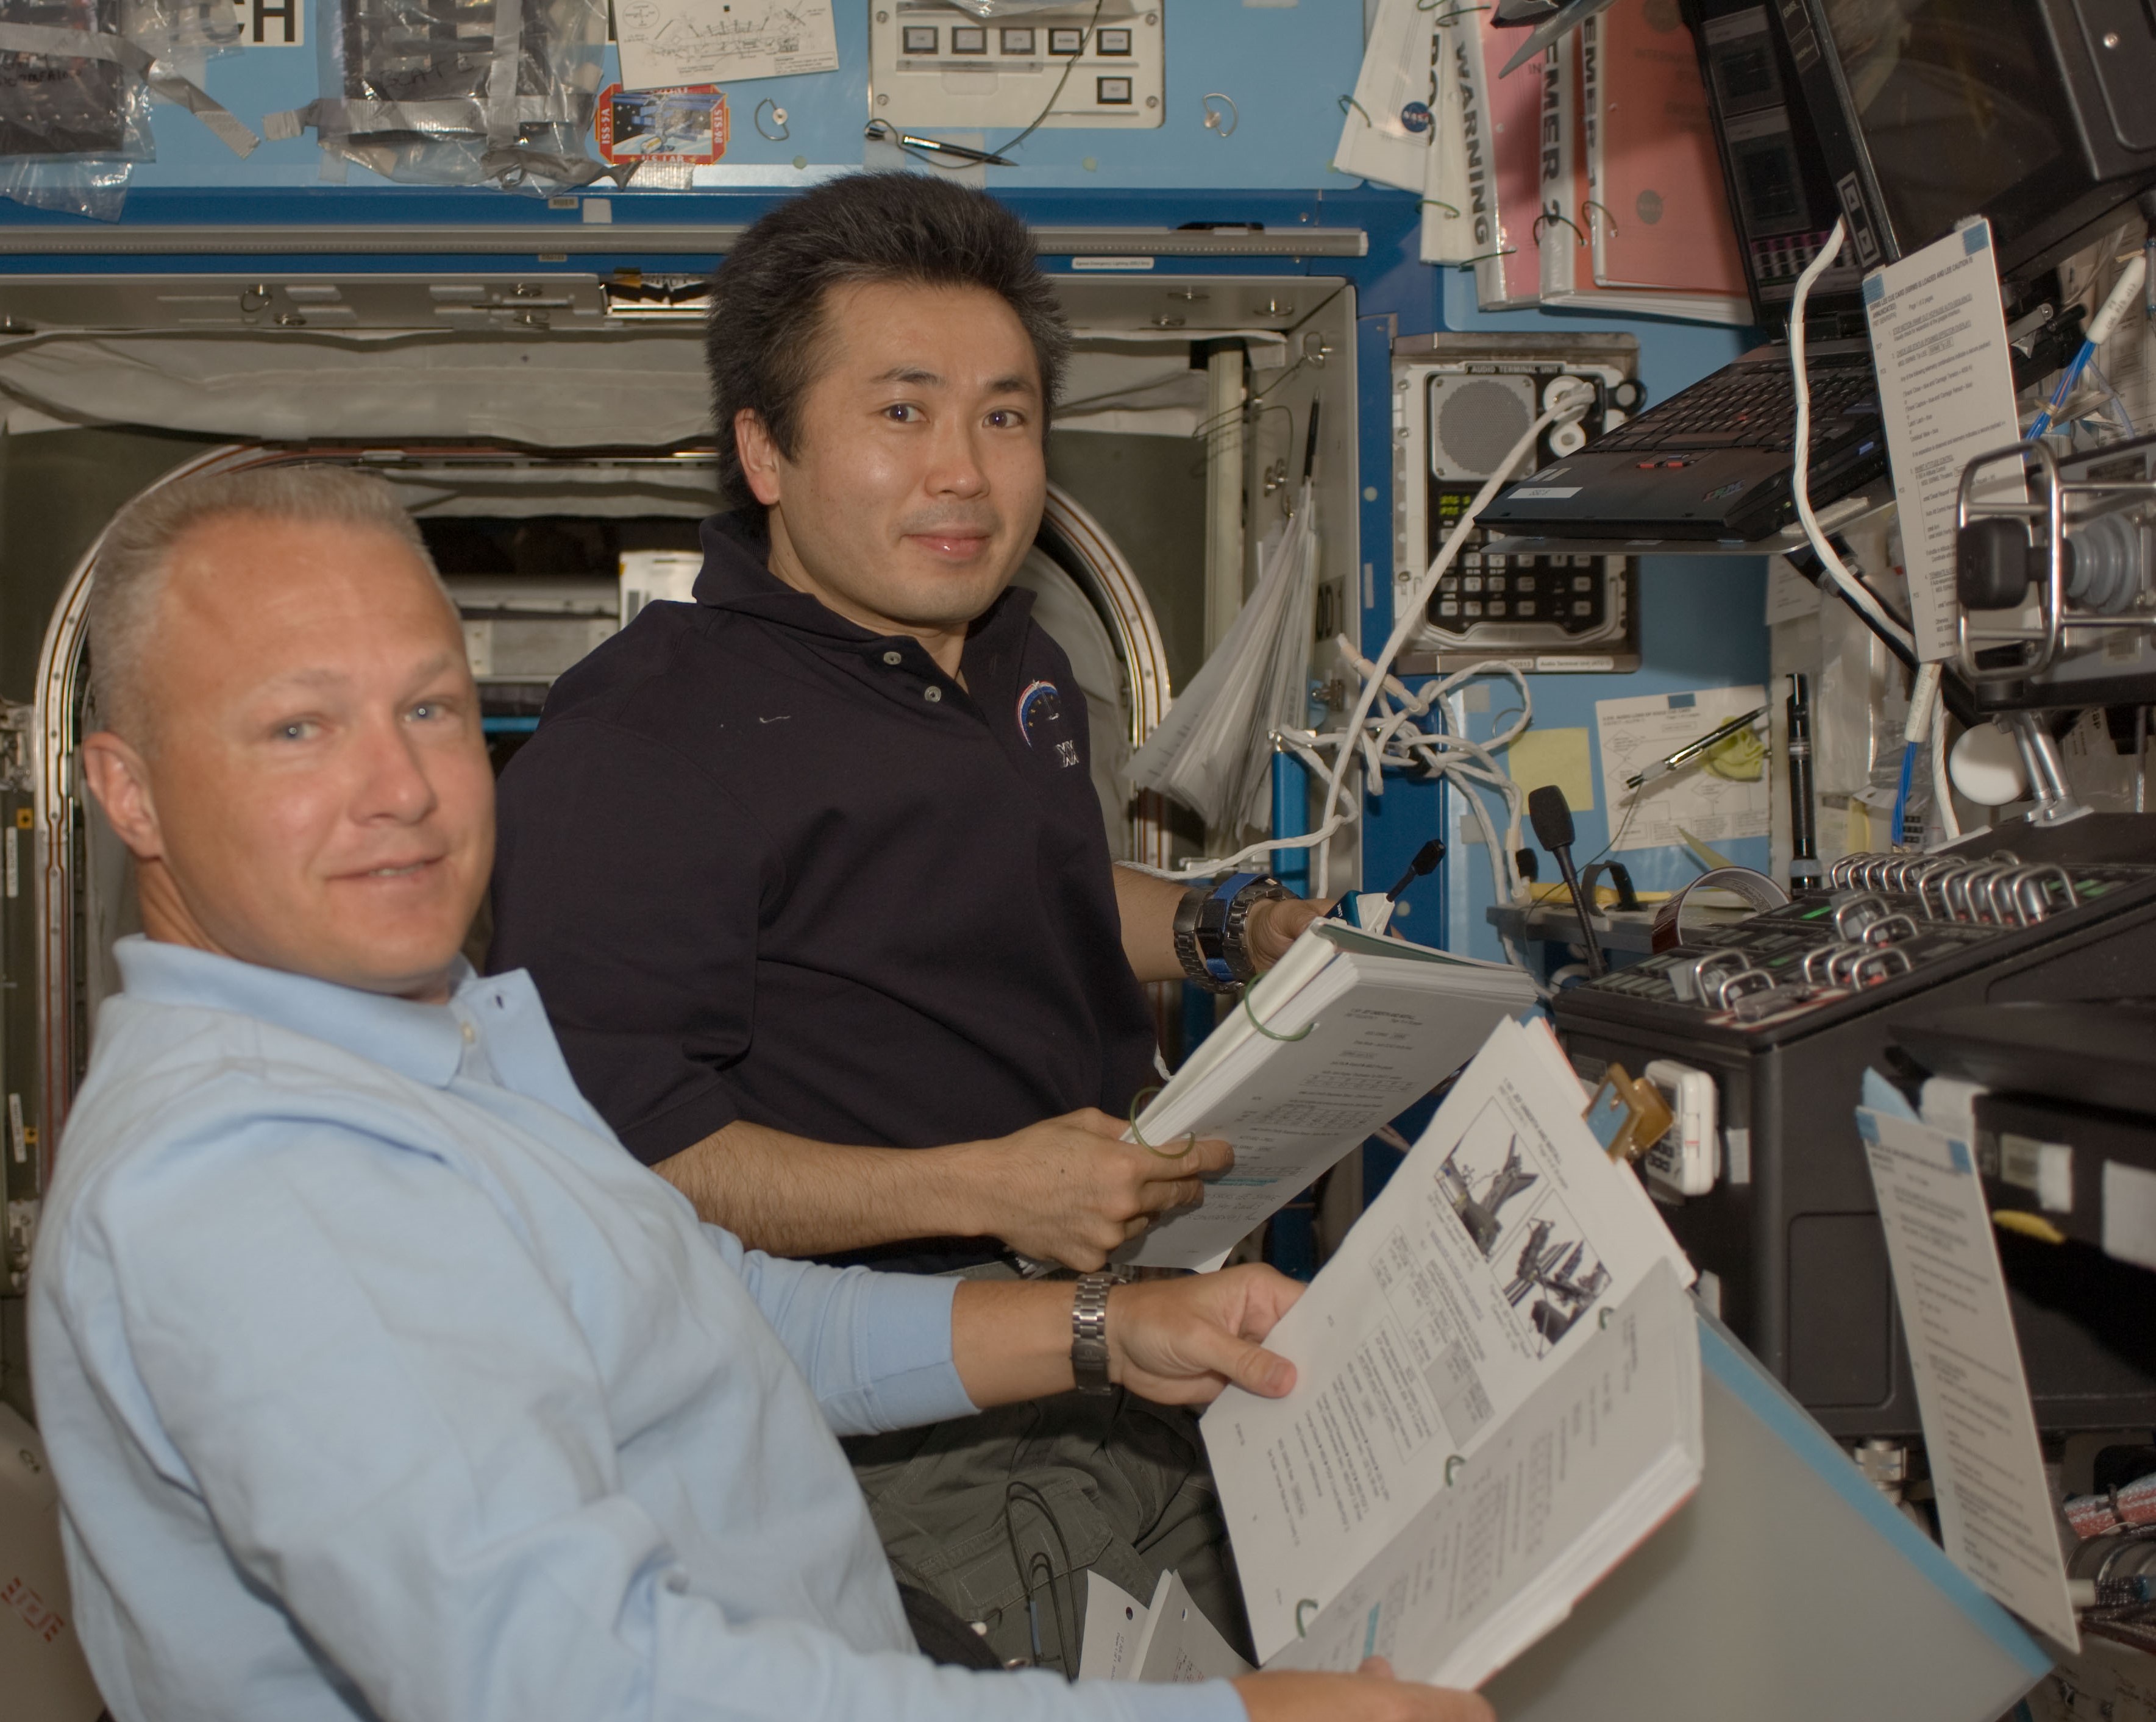 Douglas G. Hurley, left, and Koichi Wakata of the Japan Aerospace Exploration Agency operate the station’s robotic arm during the first spacewalk